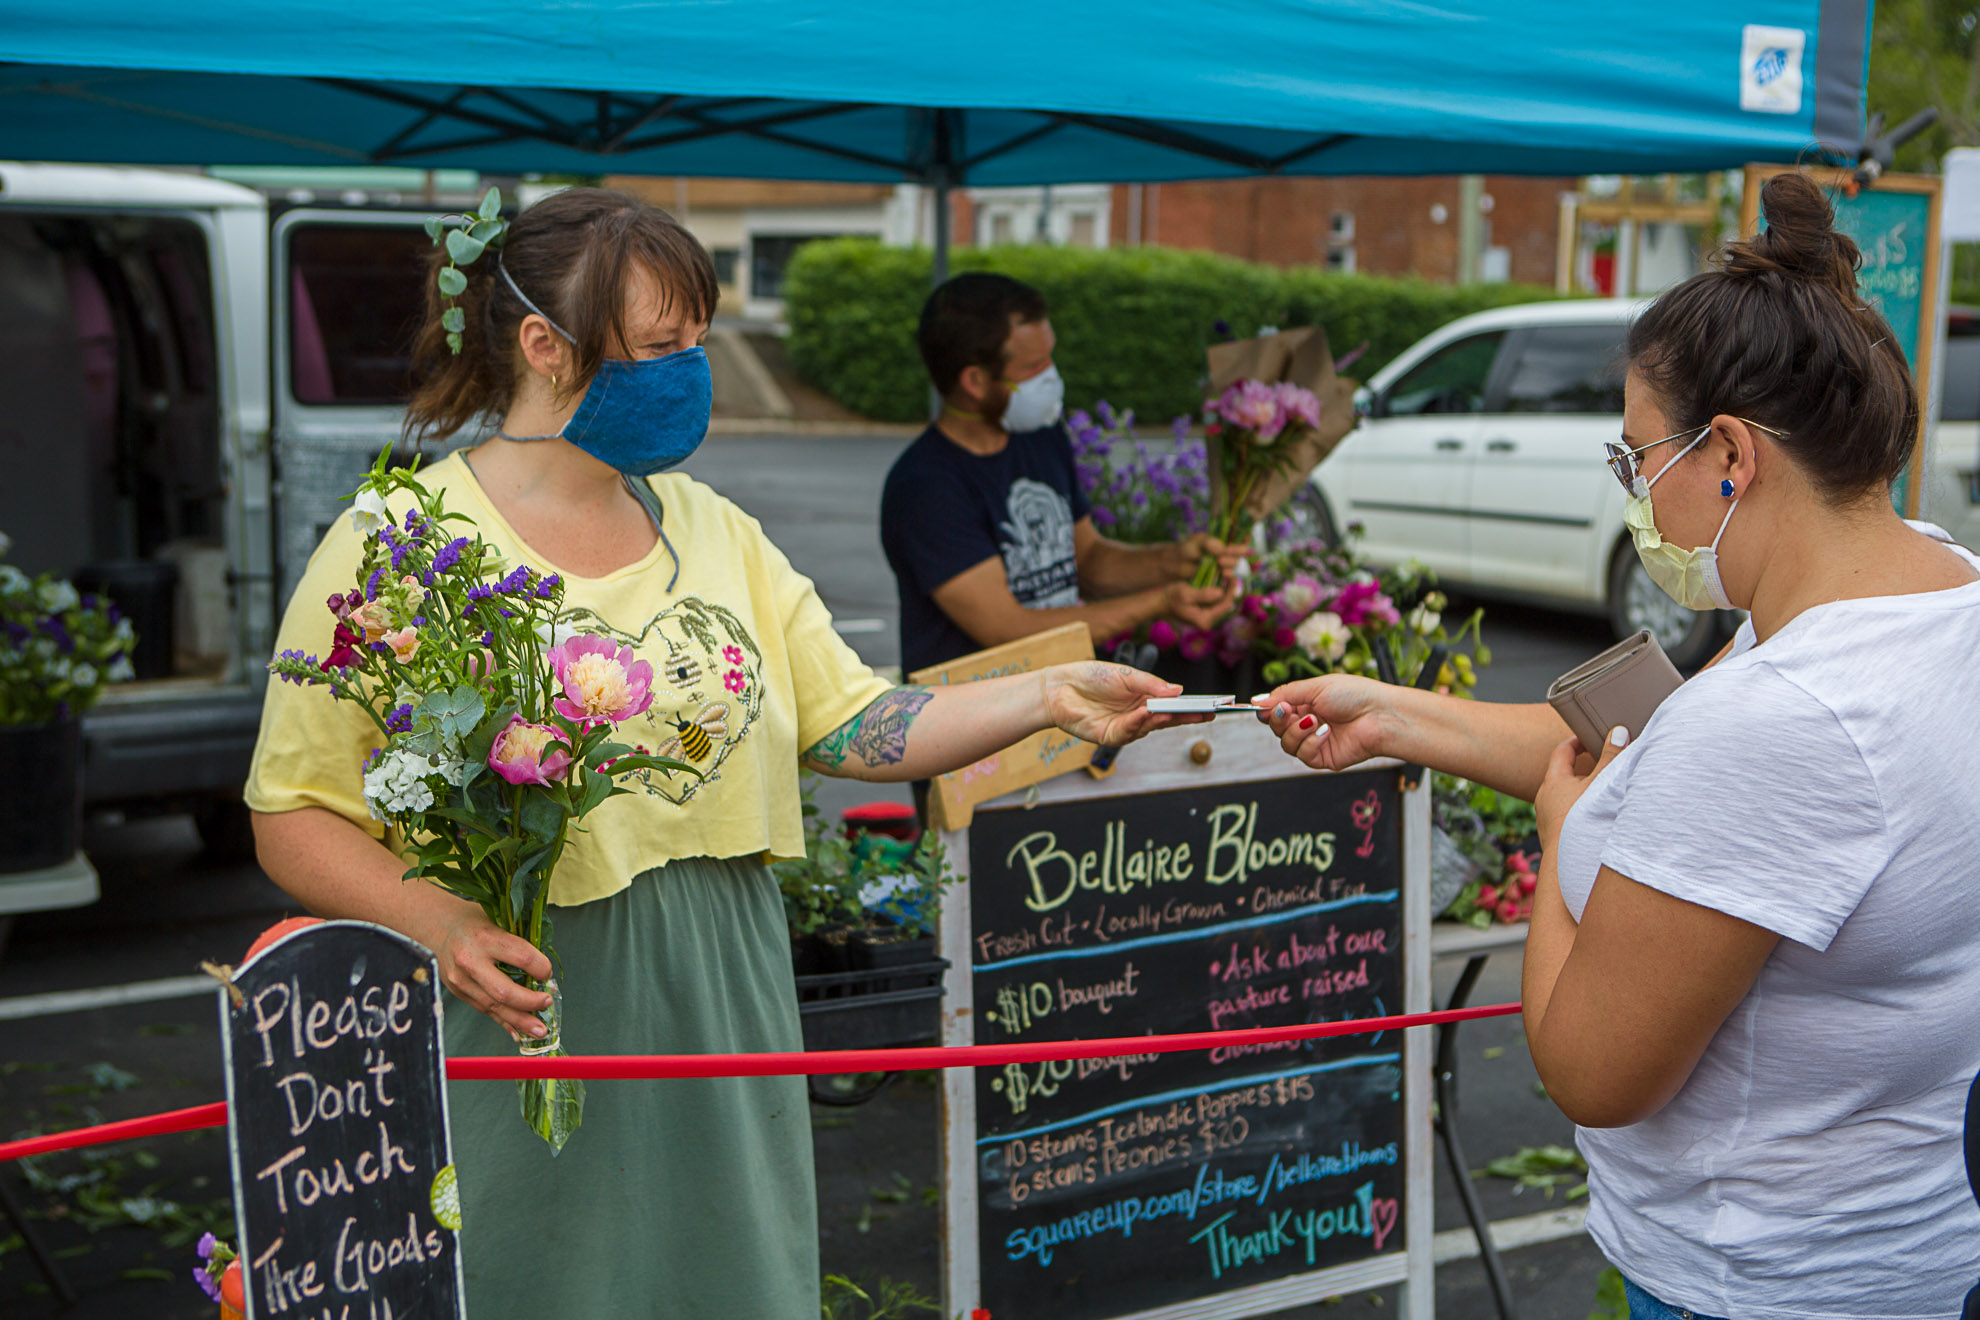 Shelby Wheeler of Bellaire Blooms helped a customer with flowers at the Lexington Farmers Market. Photo by Matt Barton